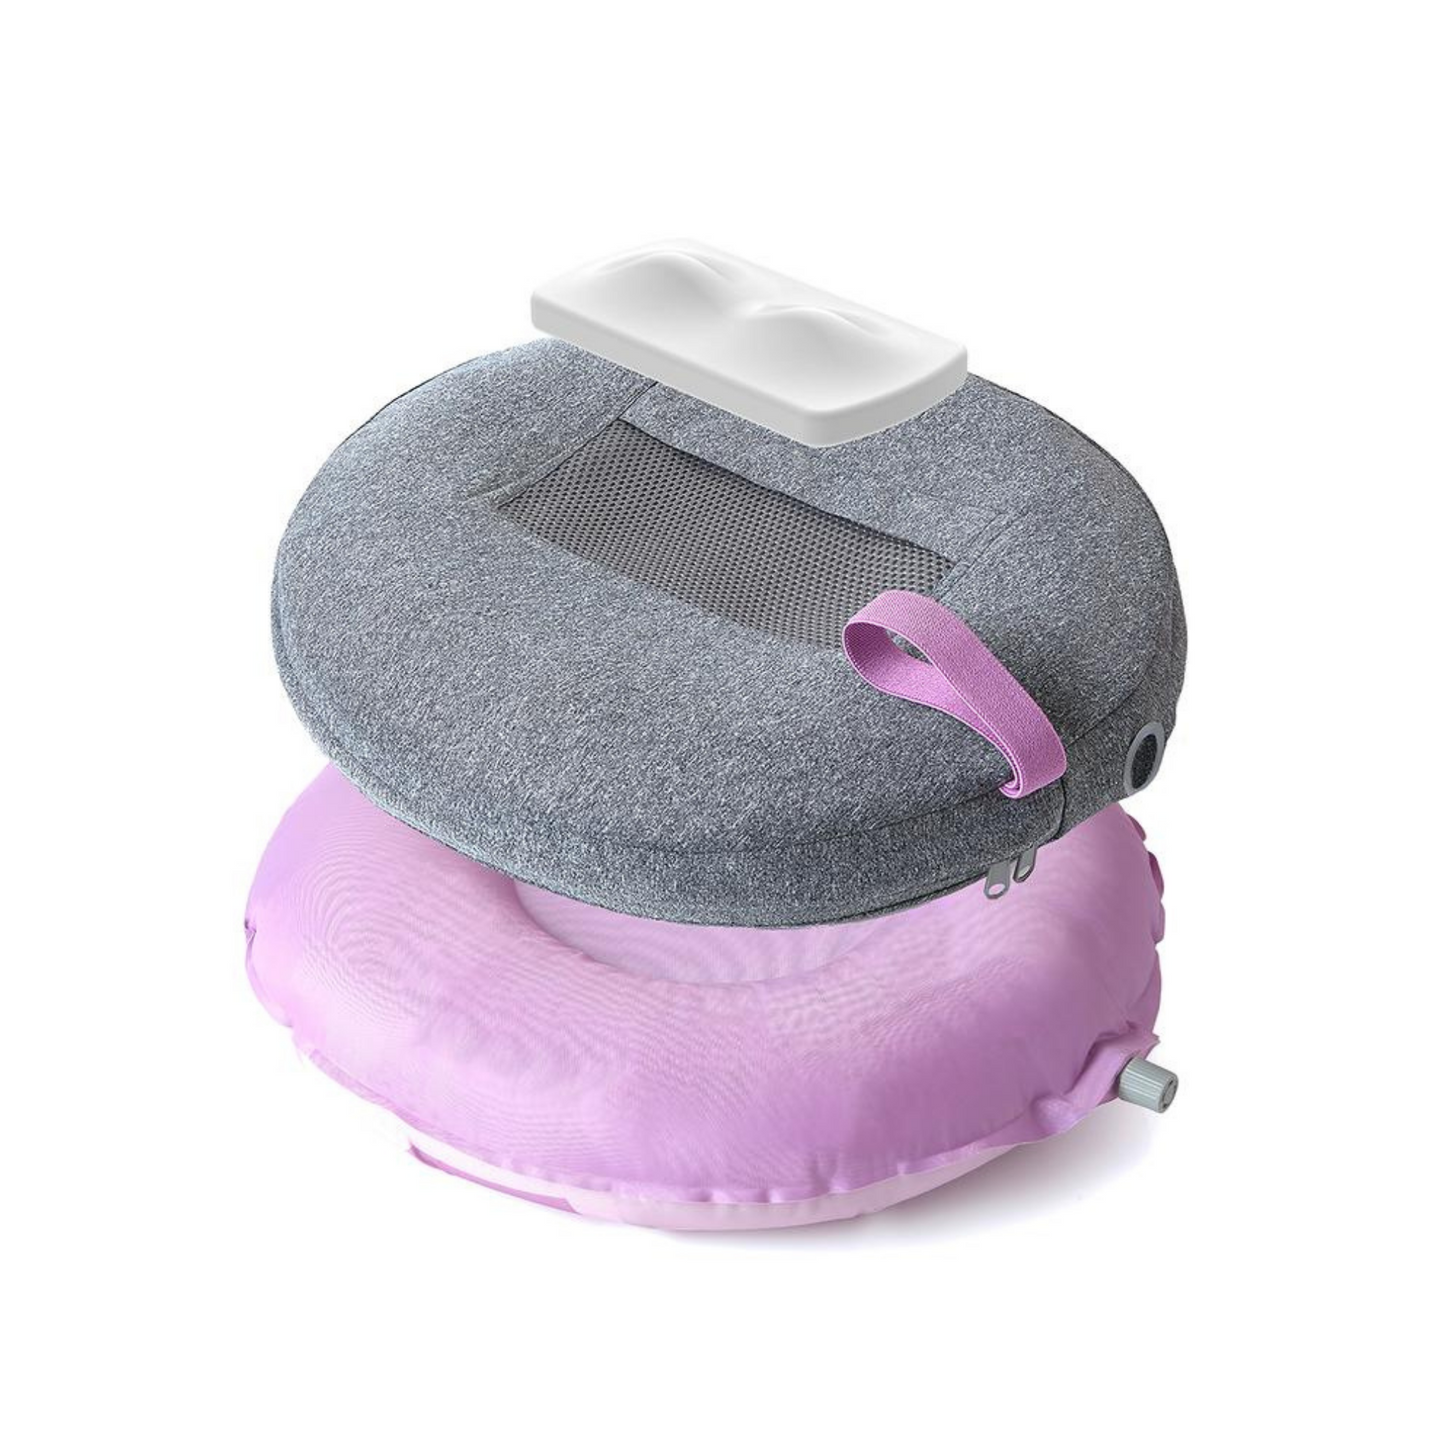 Primary Image of Perineal Cooling Comfort Cushion